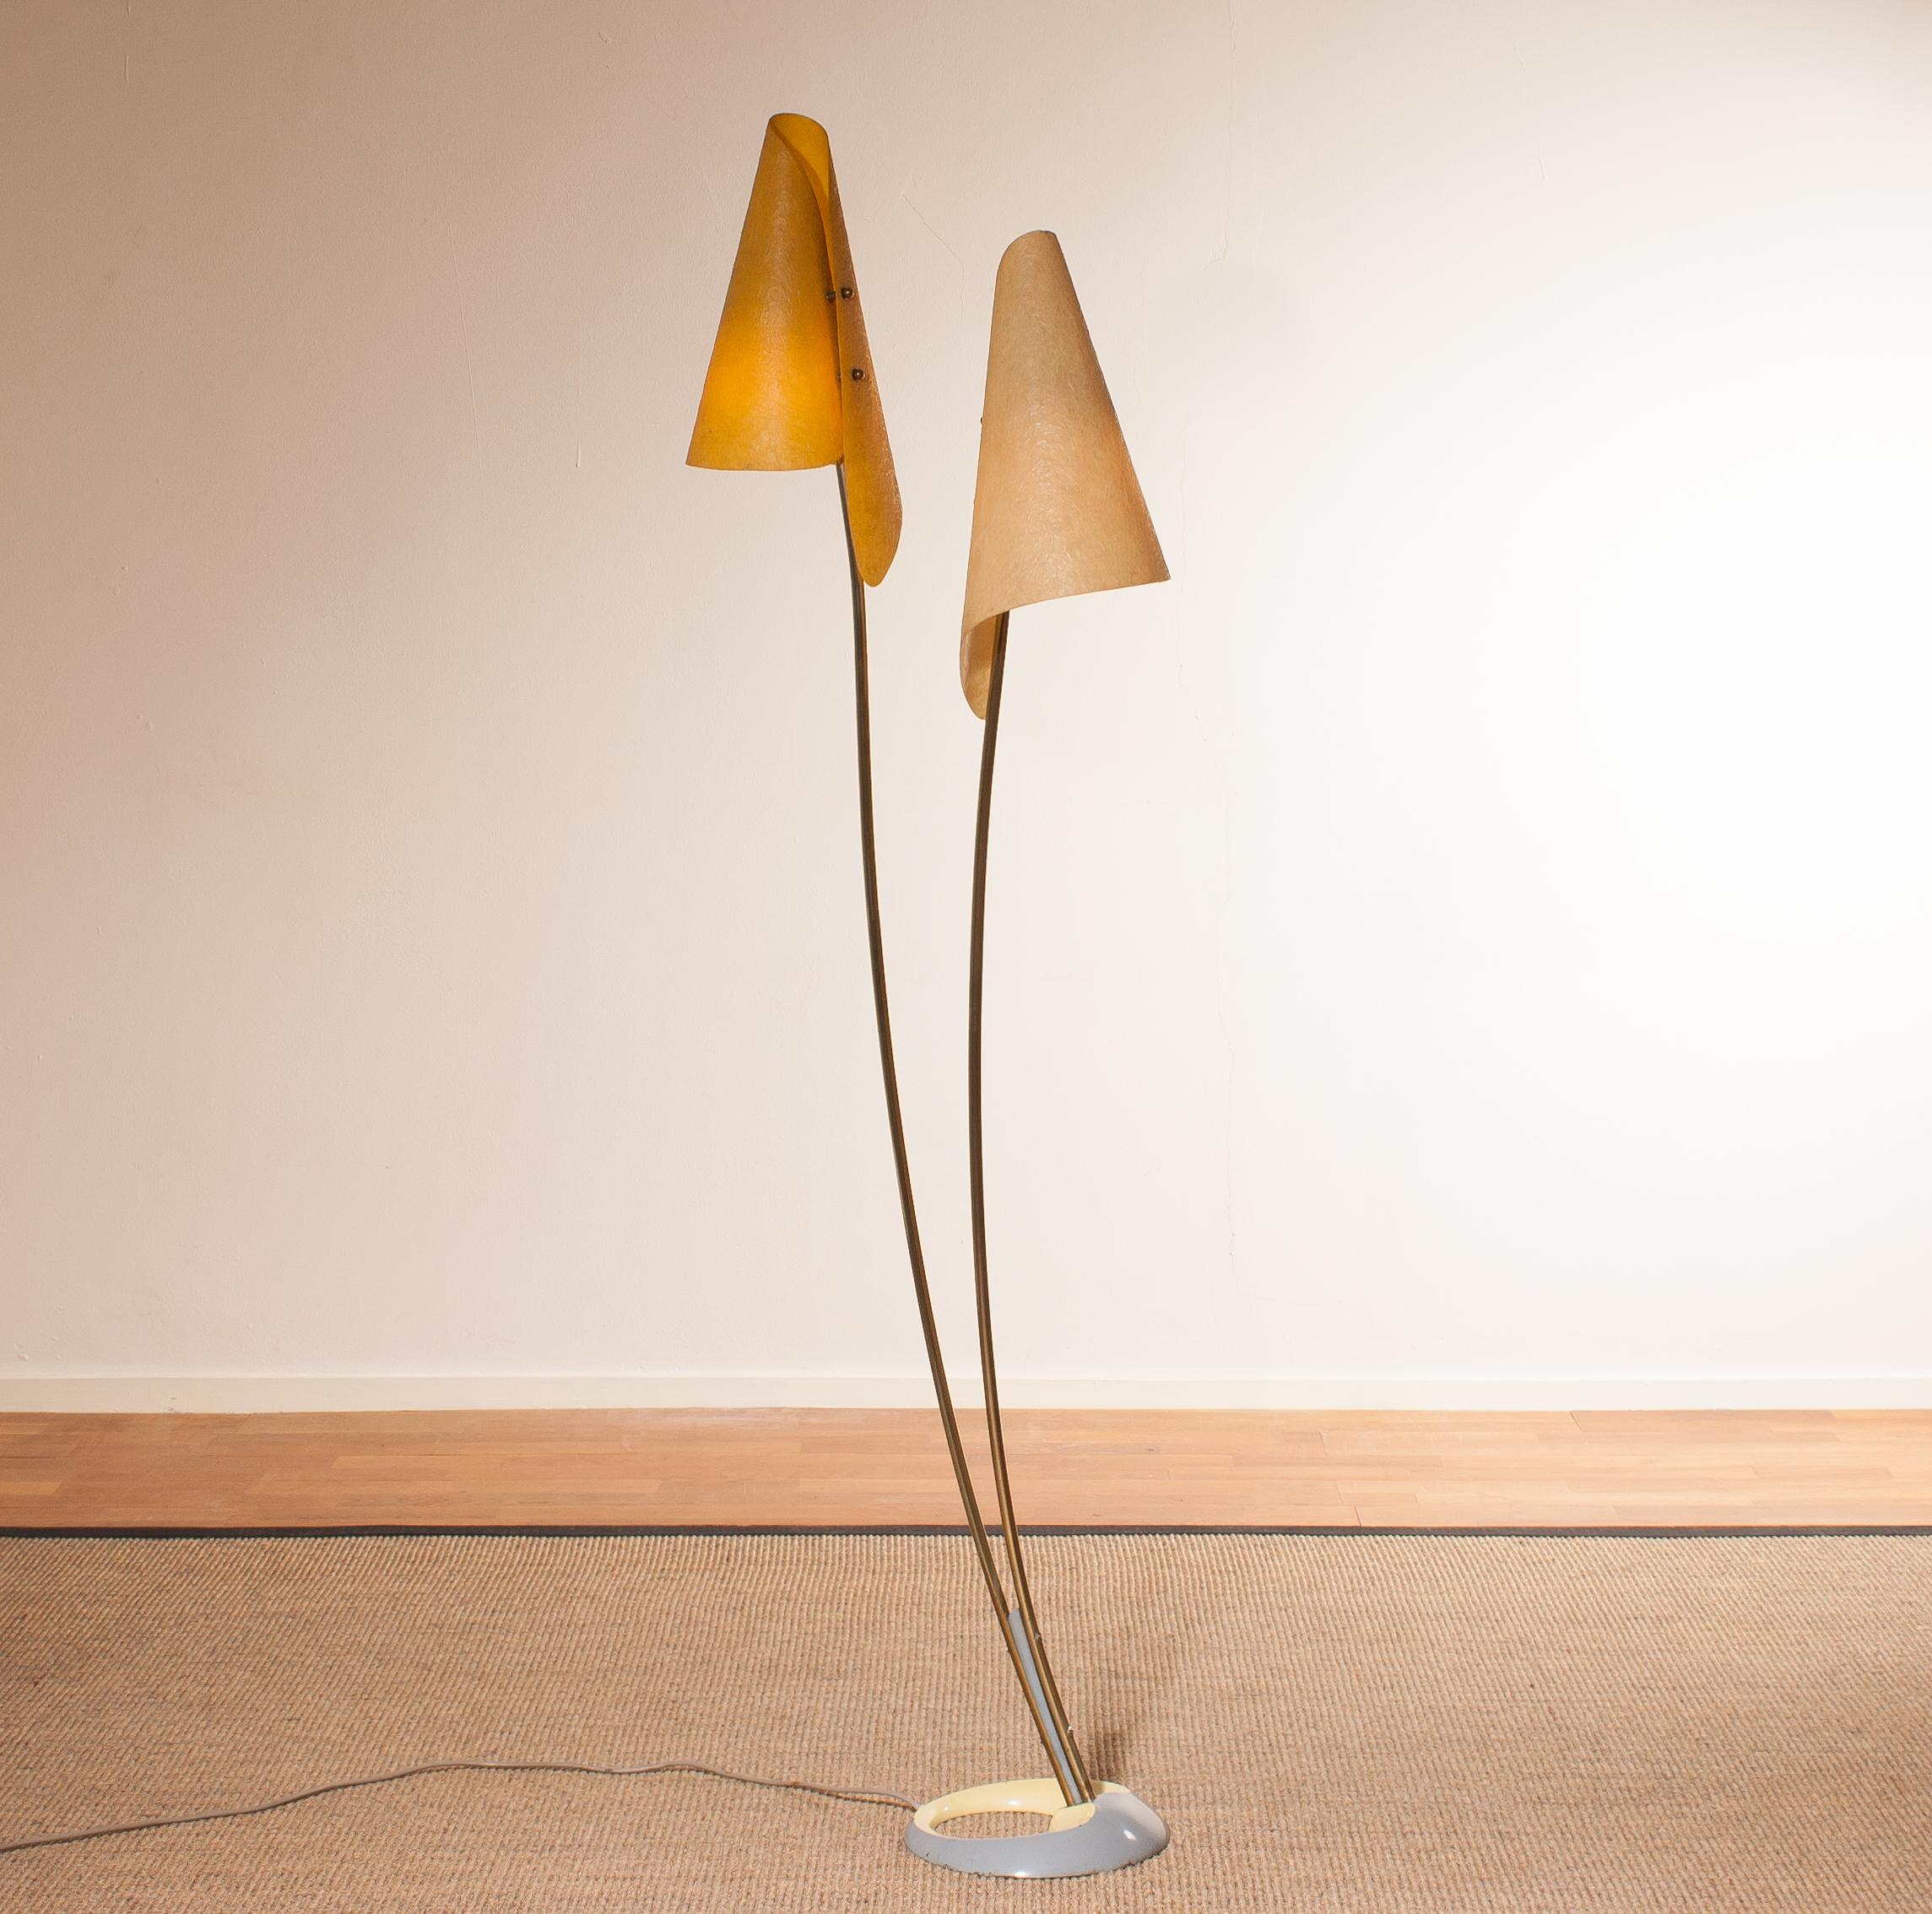 Very rare and beautiful floor lamp with two fiberglass shades and a wonderful design stand.
This very nice design is made in Germany.
It is in a very good and working condition.
Period 1960s.
Dimensions: H 164 cm, W 46 cm, D 25 cm.